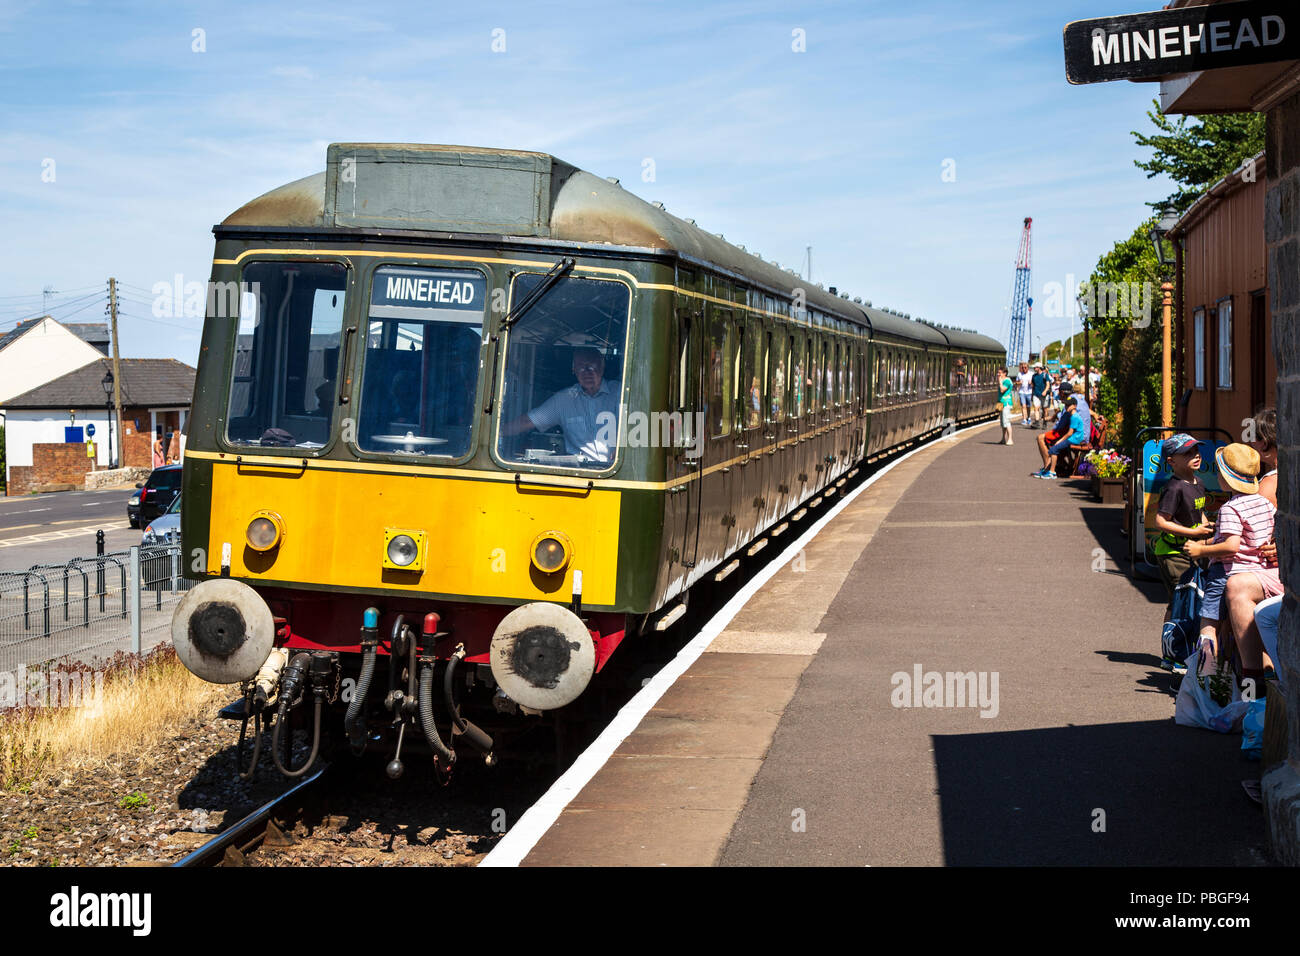 Diesel Multiple Unit (DMU) or Diesel Railcar, Class 115, number 51859, operated by the West Somerset heritage Railway, seen at Watchet Station Stock Photo